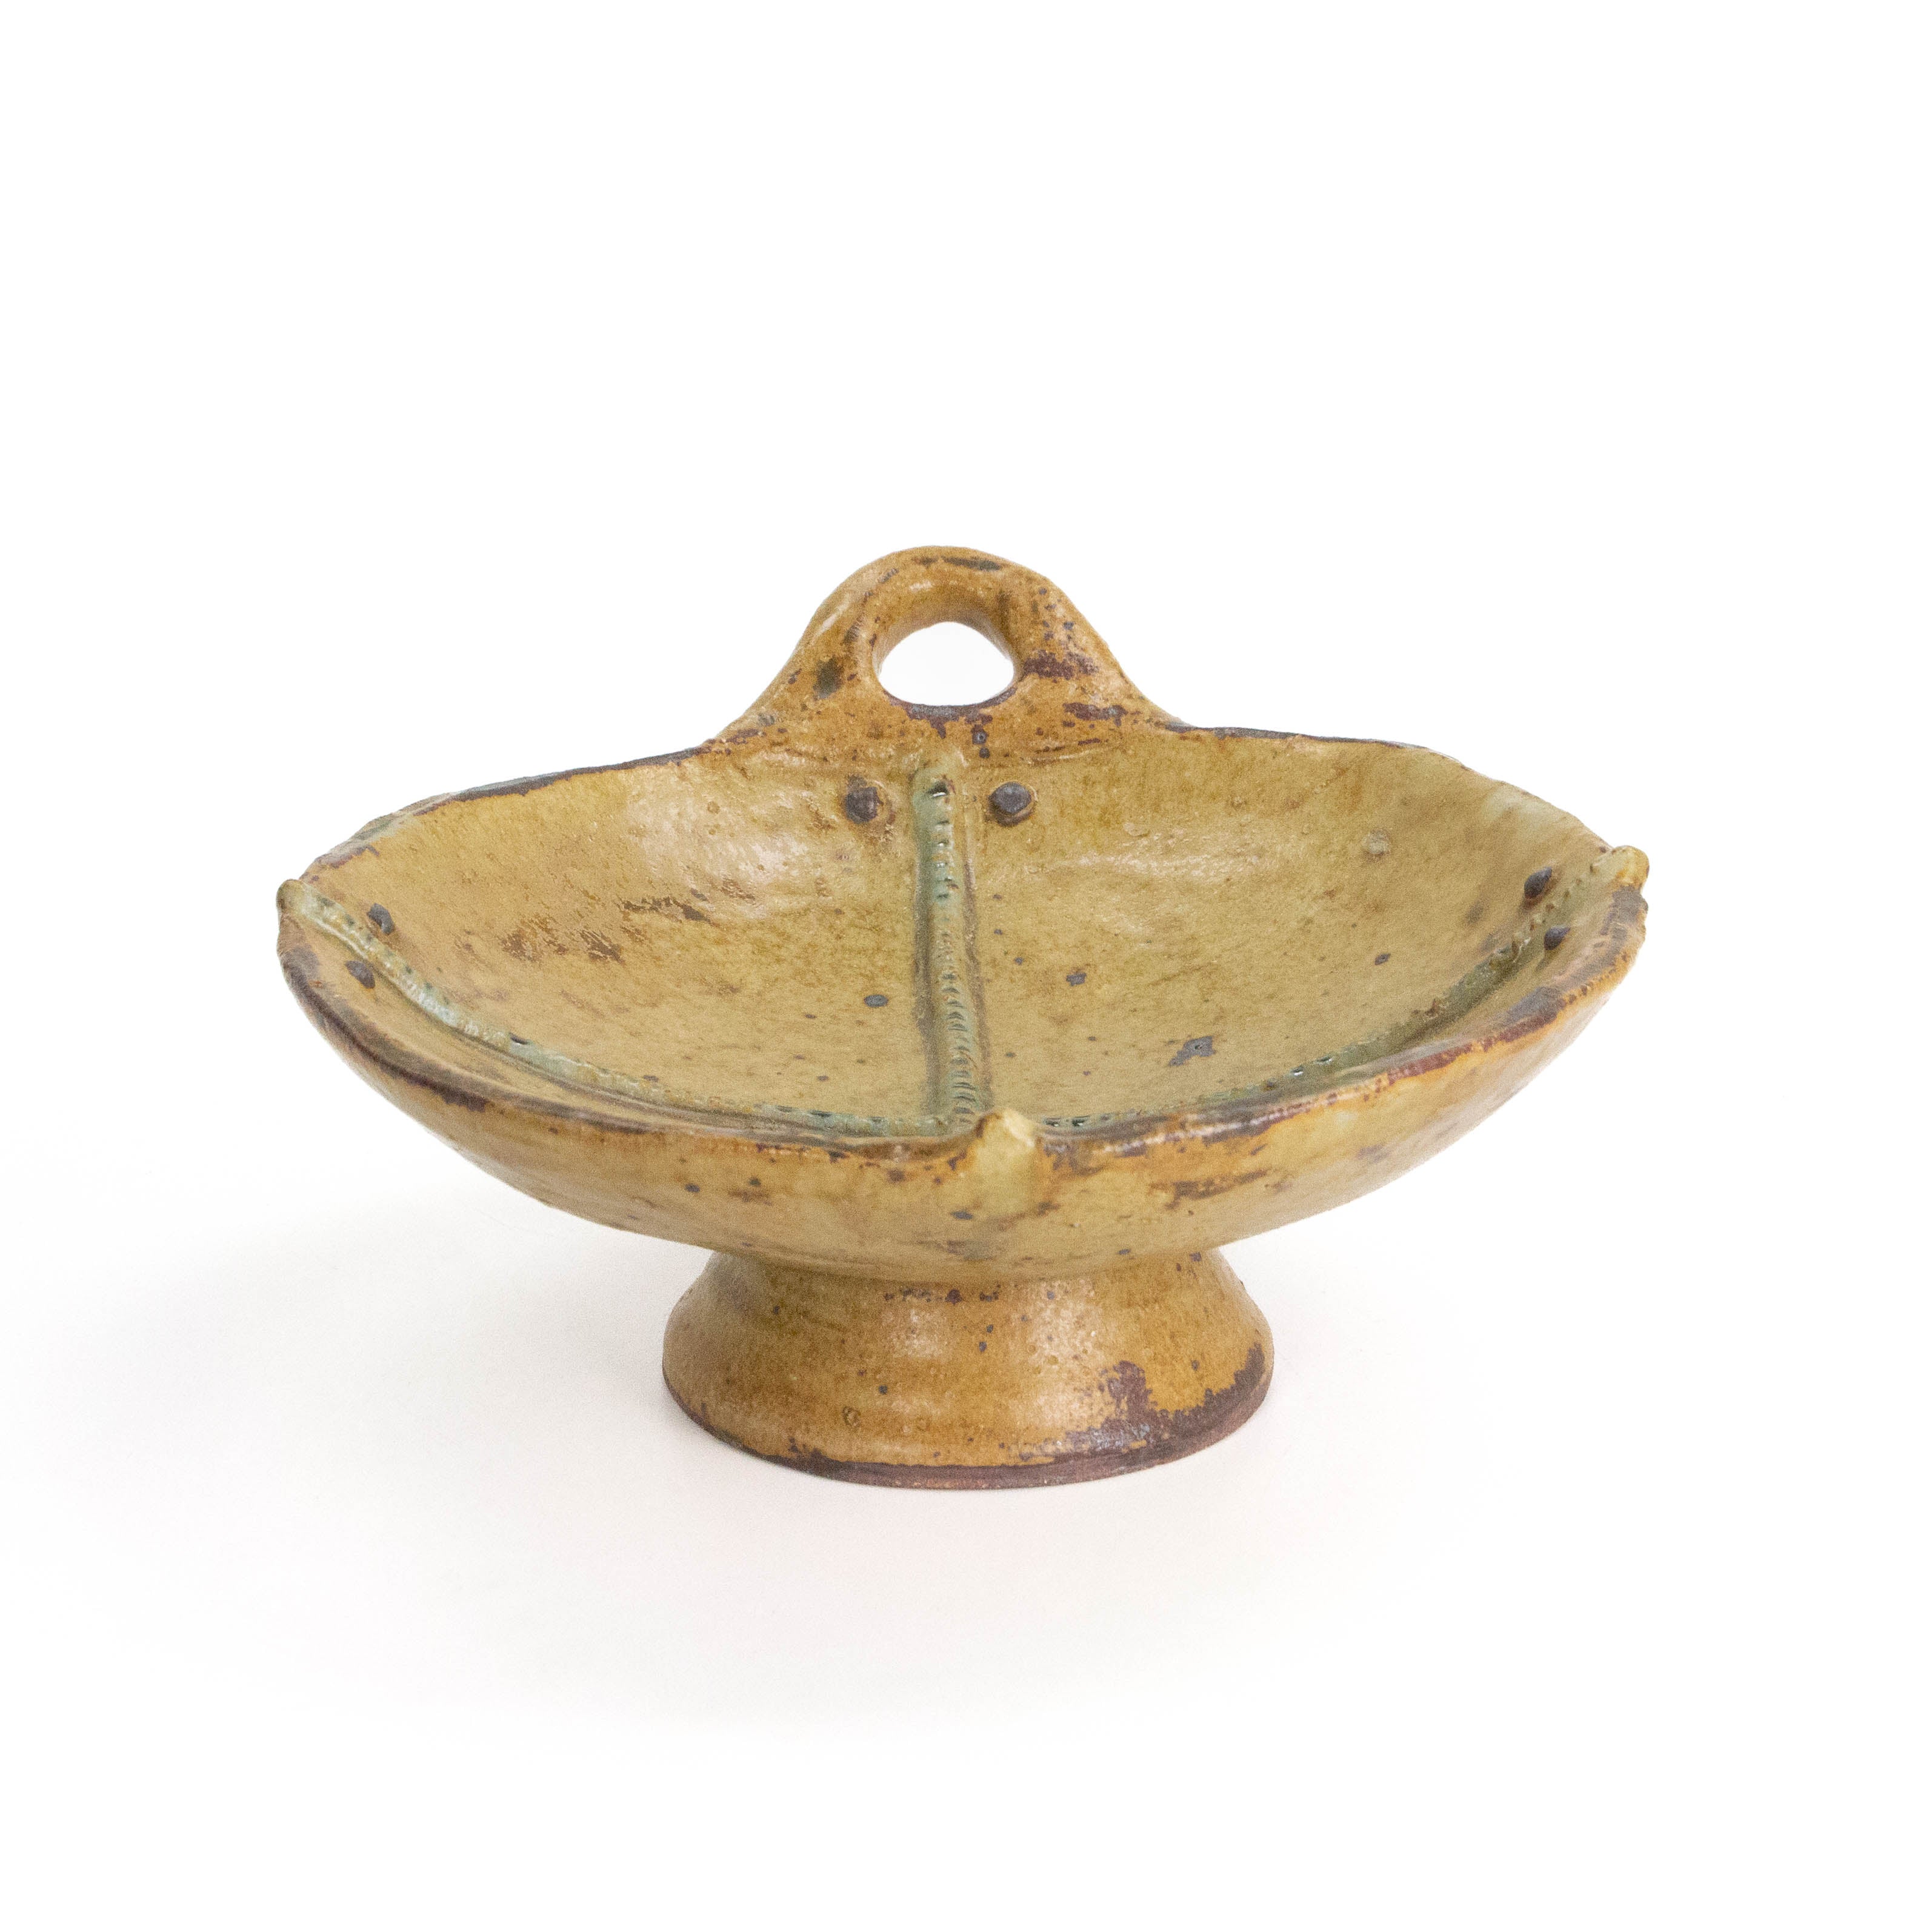 One-Handle Bowl